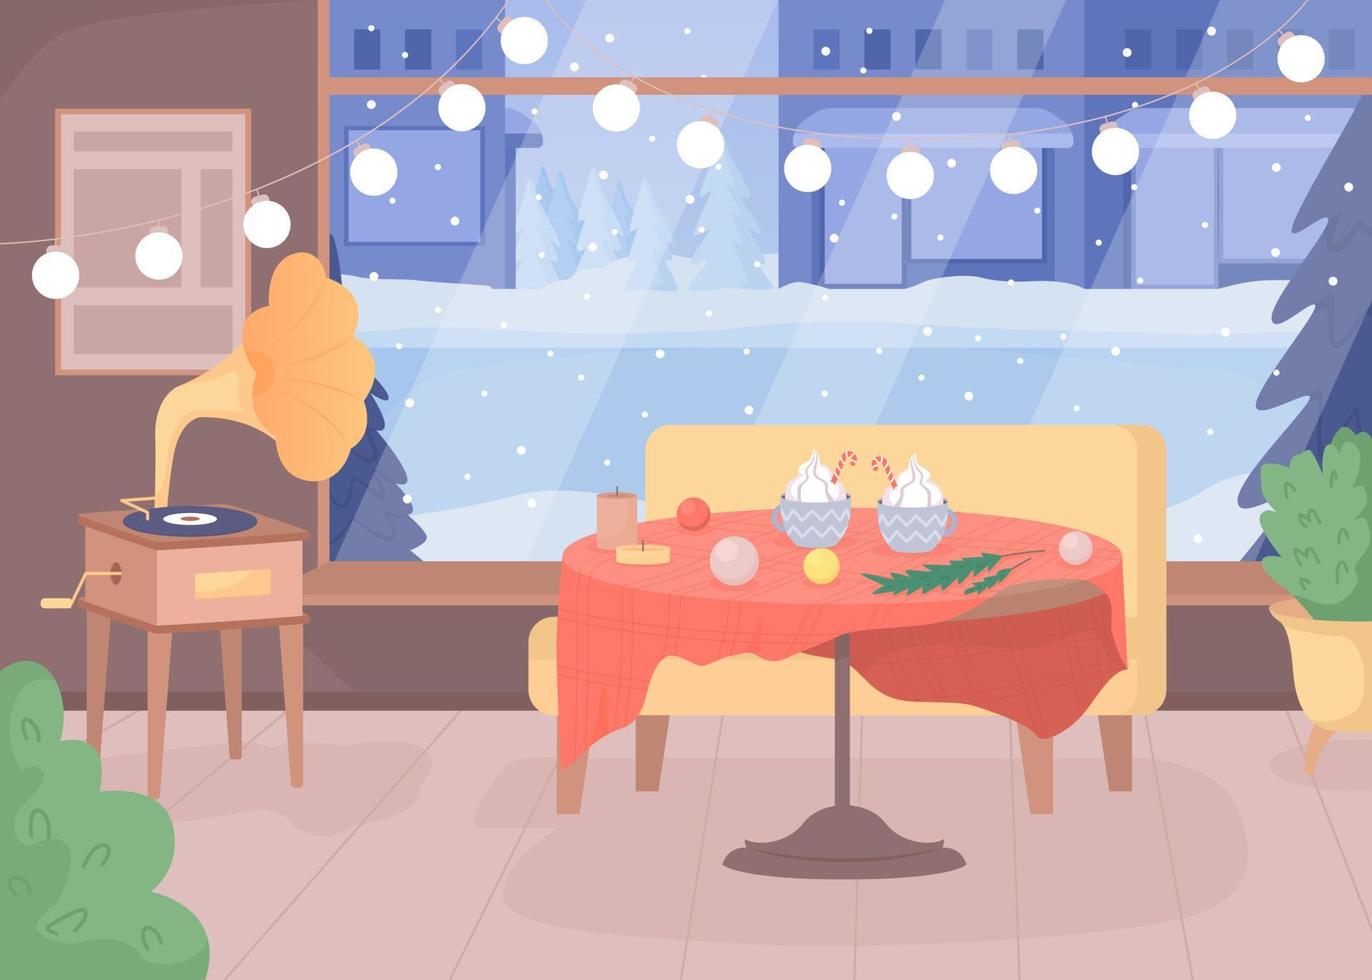 Coffee shop decorating for Christmas flat color vector illustration. Holiday celebration. Cozy bar. Fully editable 2D simple cartoon interior with Xmas scenery in wide window on background